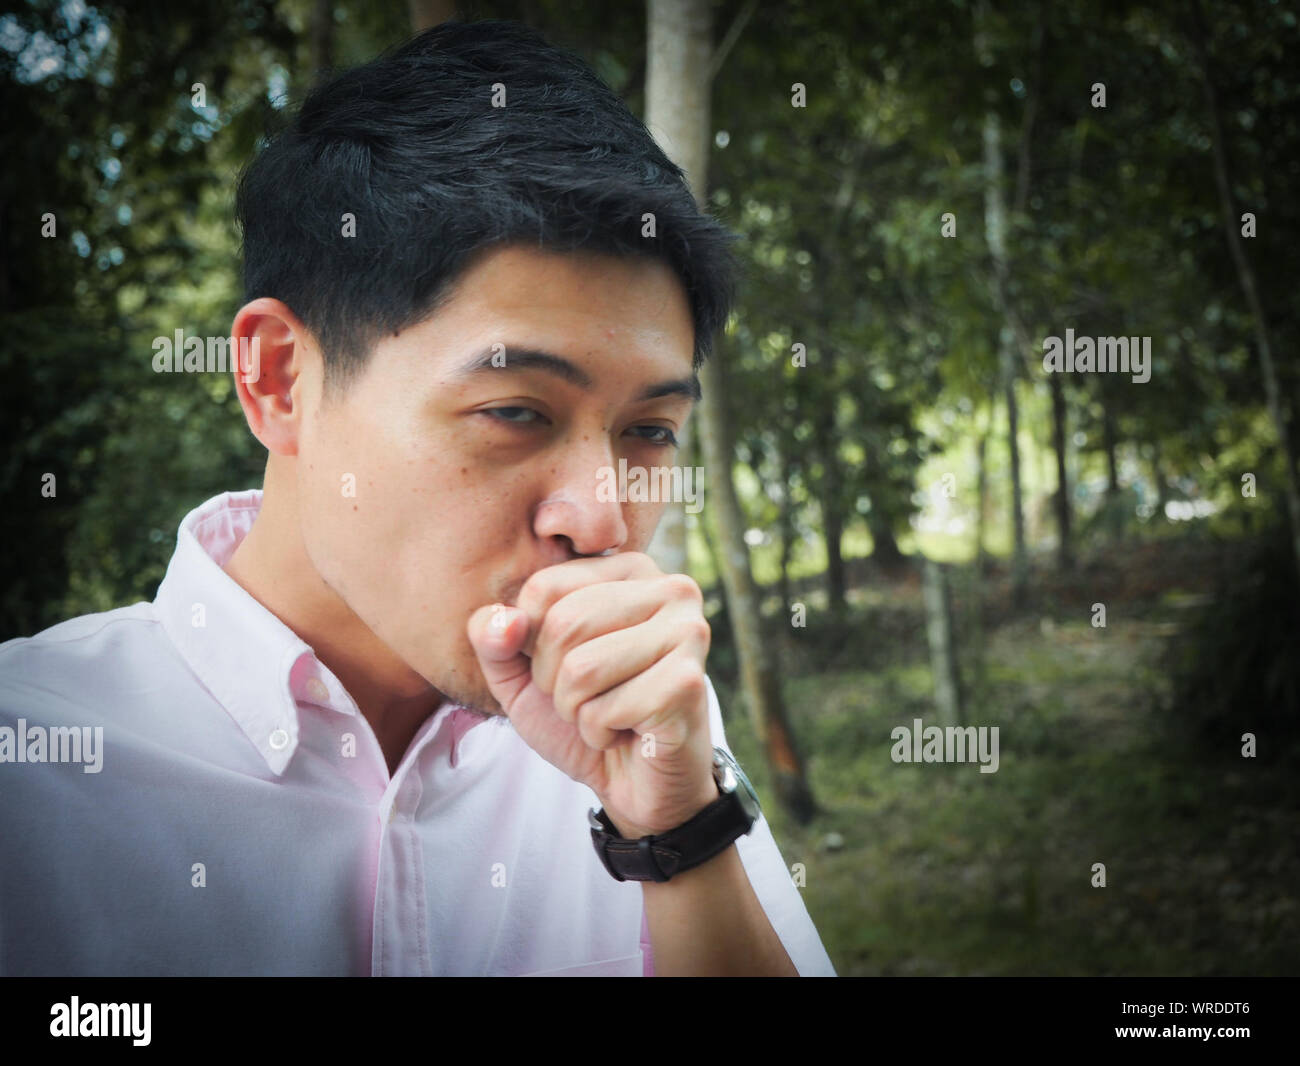 Man Coughing Against Trees At Forest Stock Photo